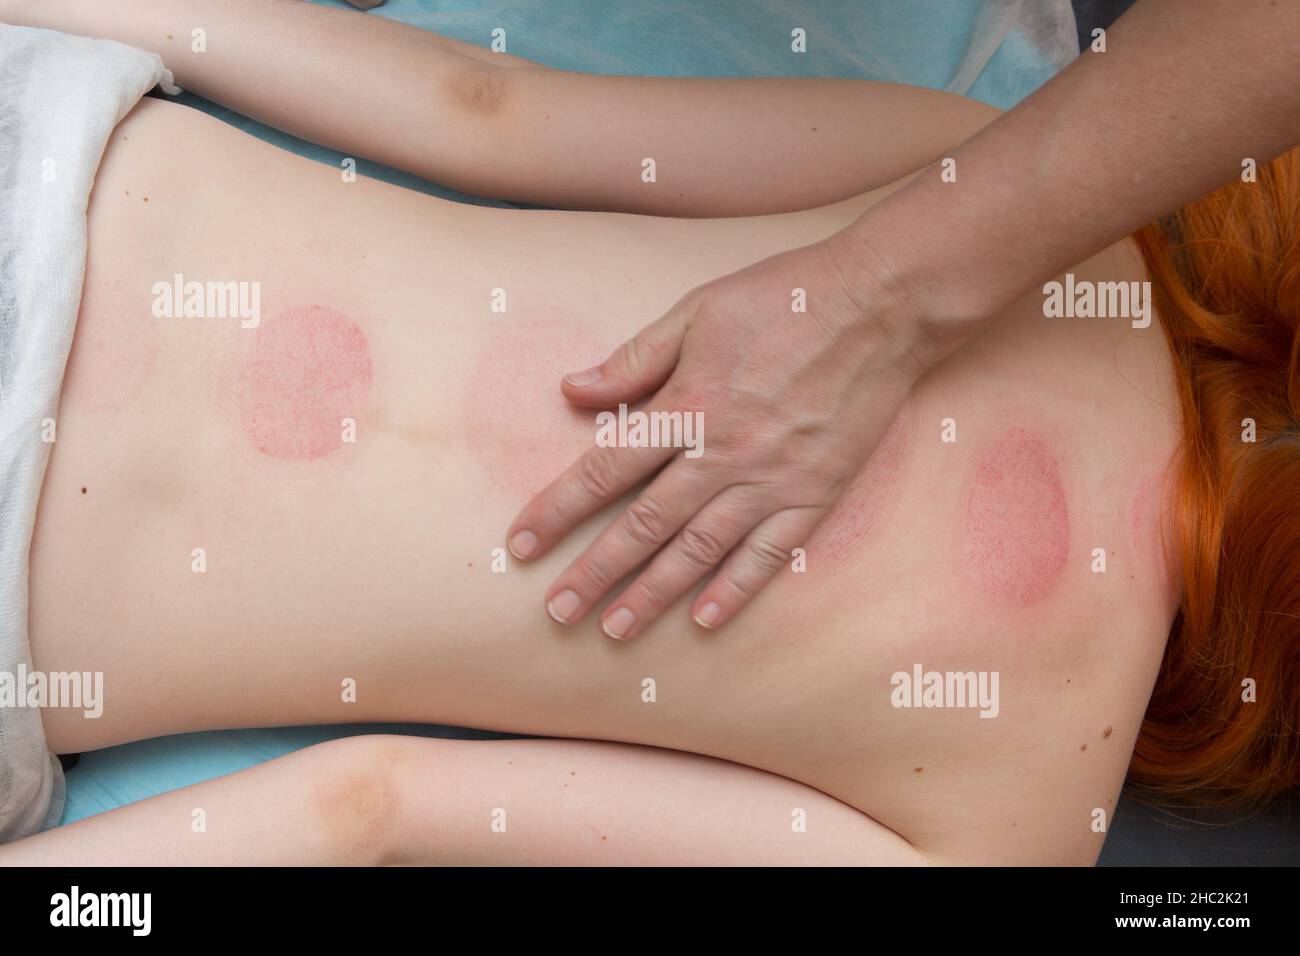 medical therapeutic back massage, relaxation of the back muscles Stock Photo